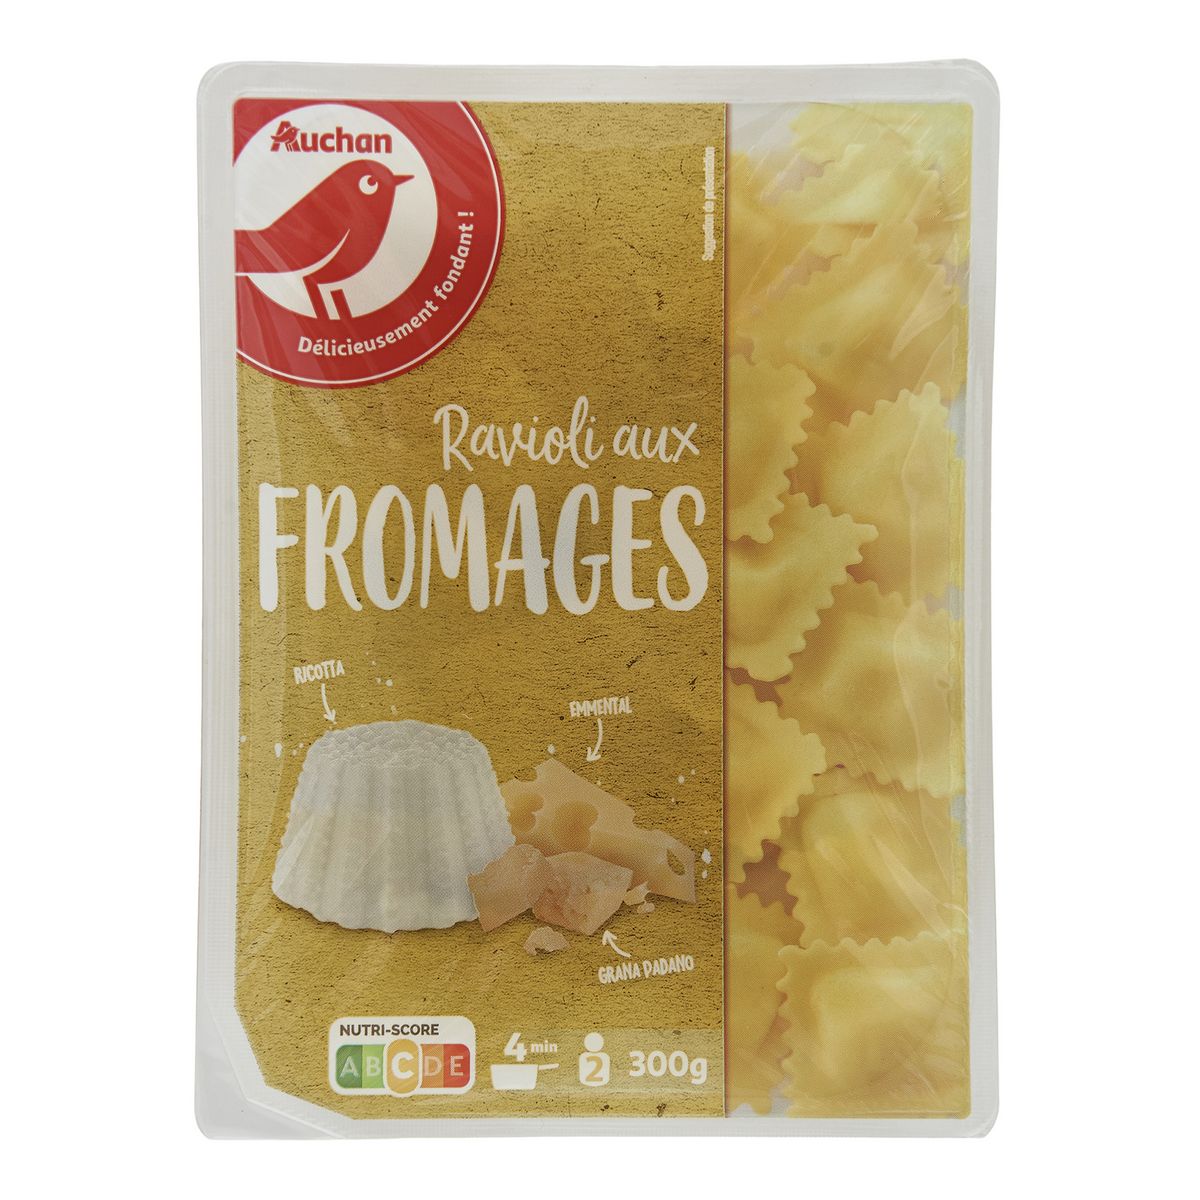 AUCHAN Ravioli aux fromages 2 portions 300g